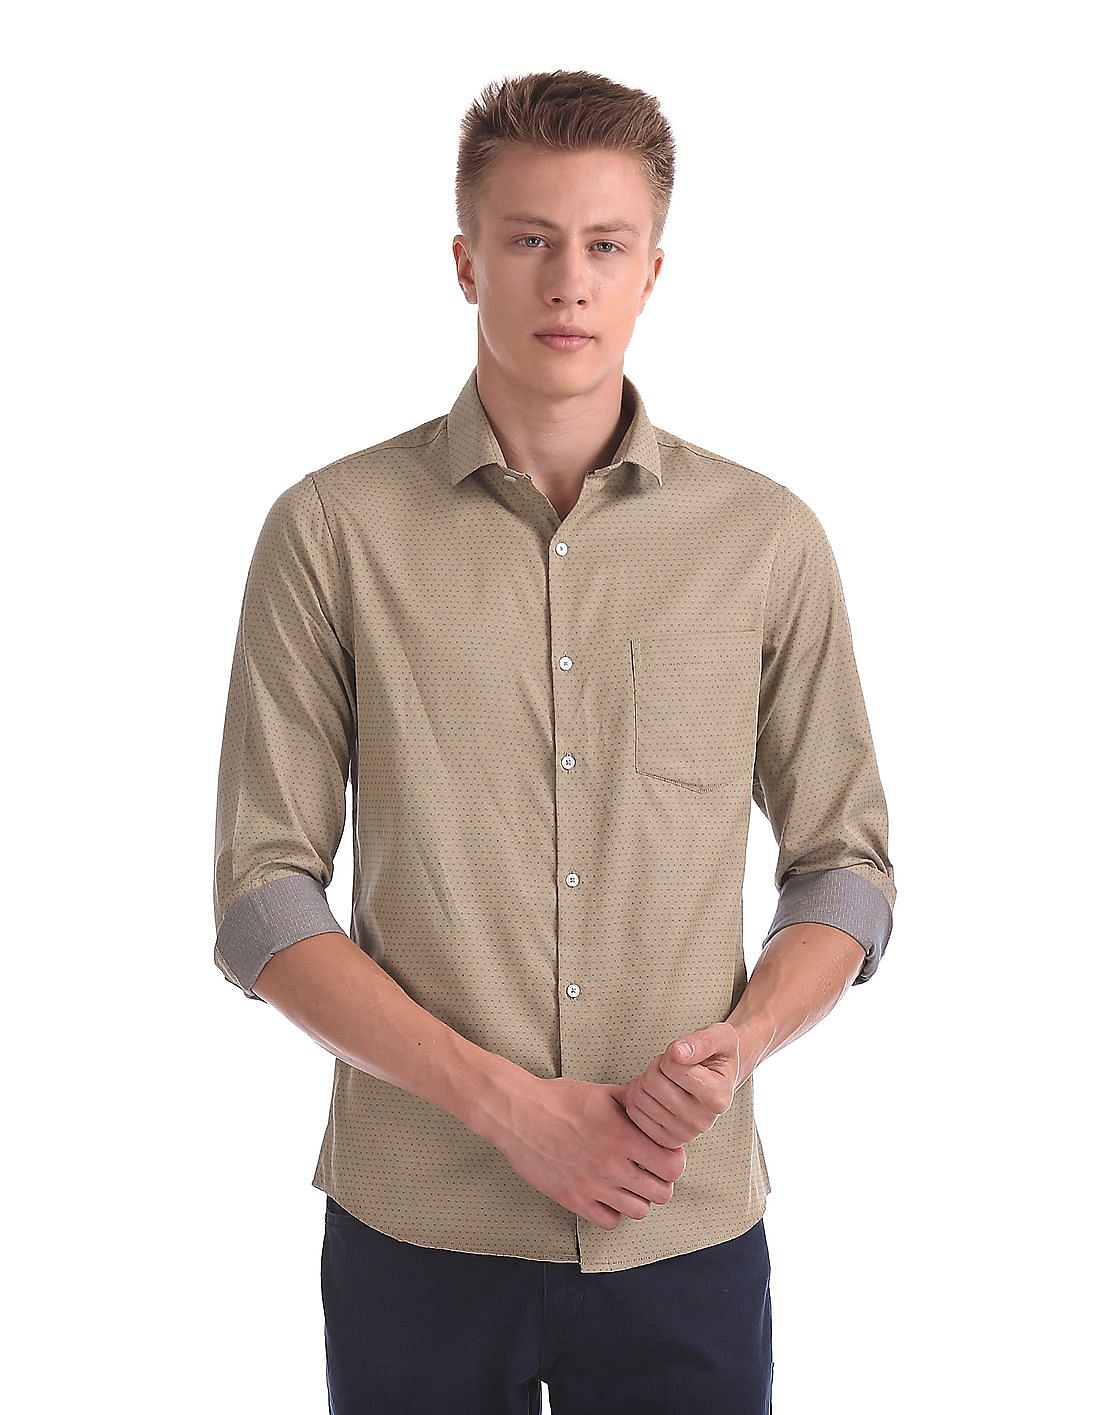 Buy Excalibur French Placket Patterned Shirt - NNNOW.com